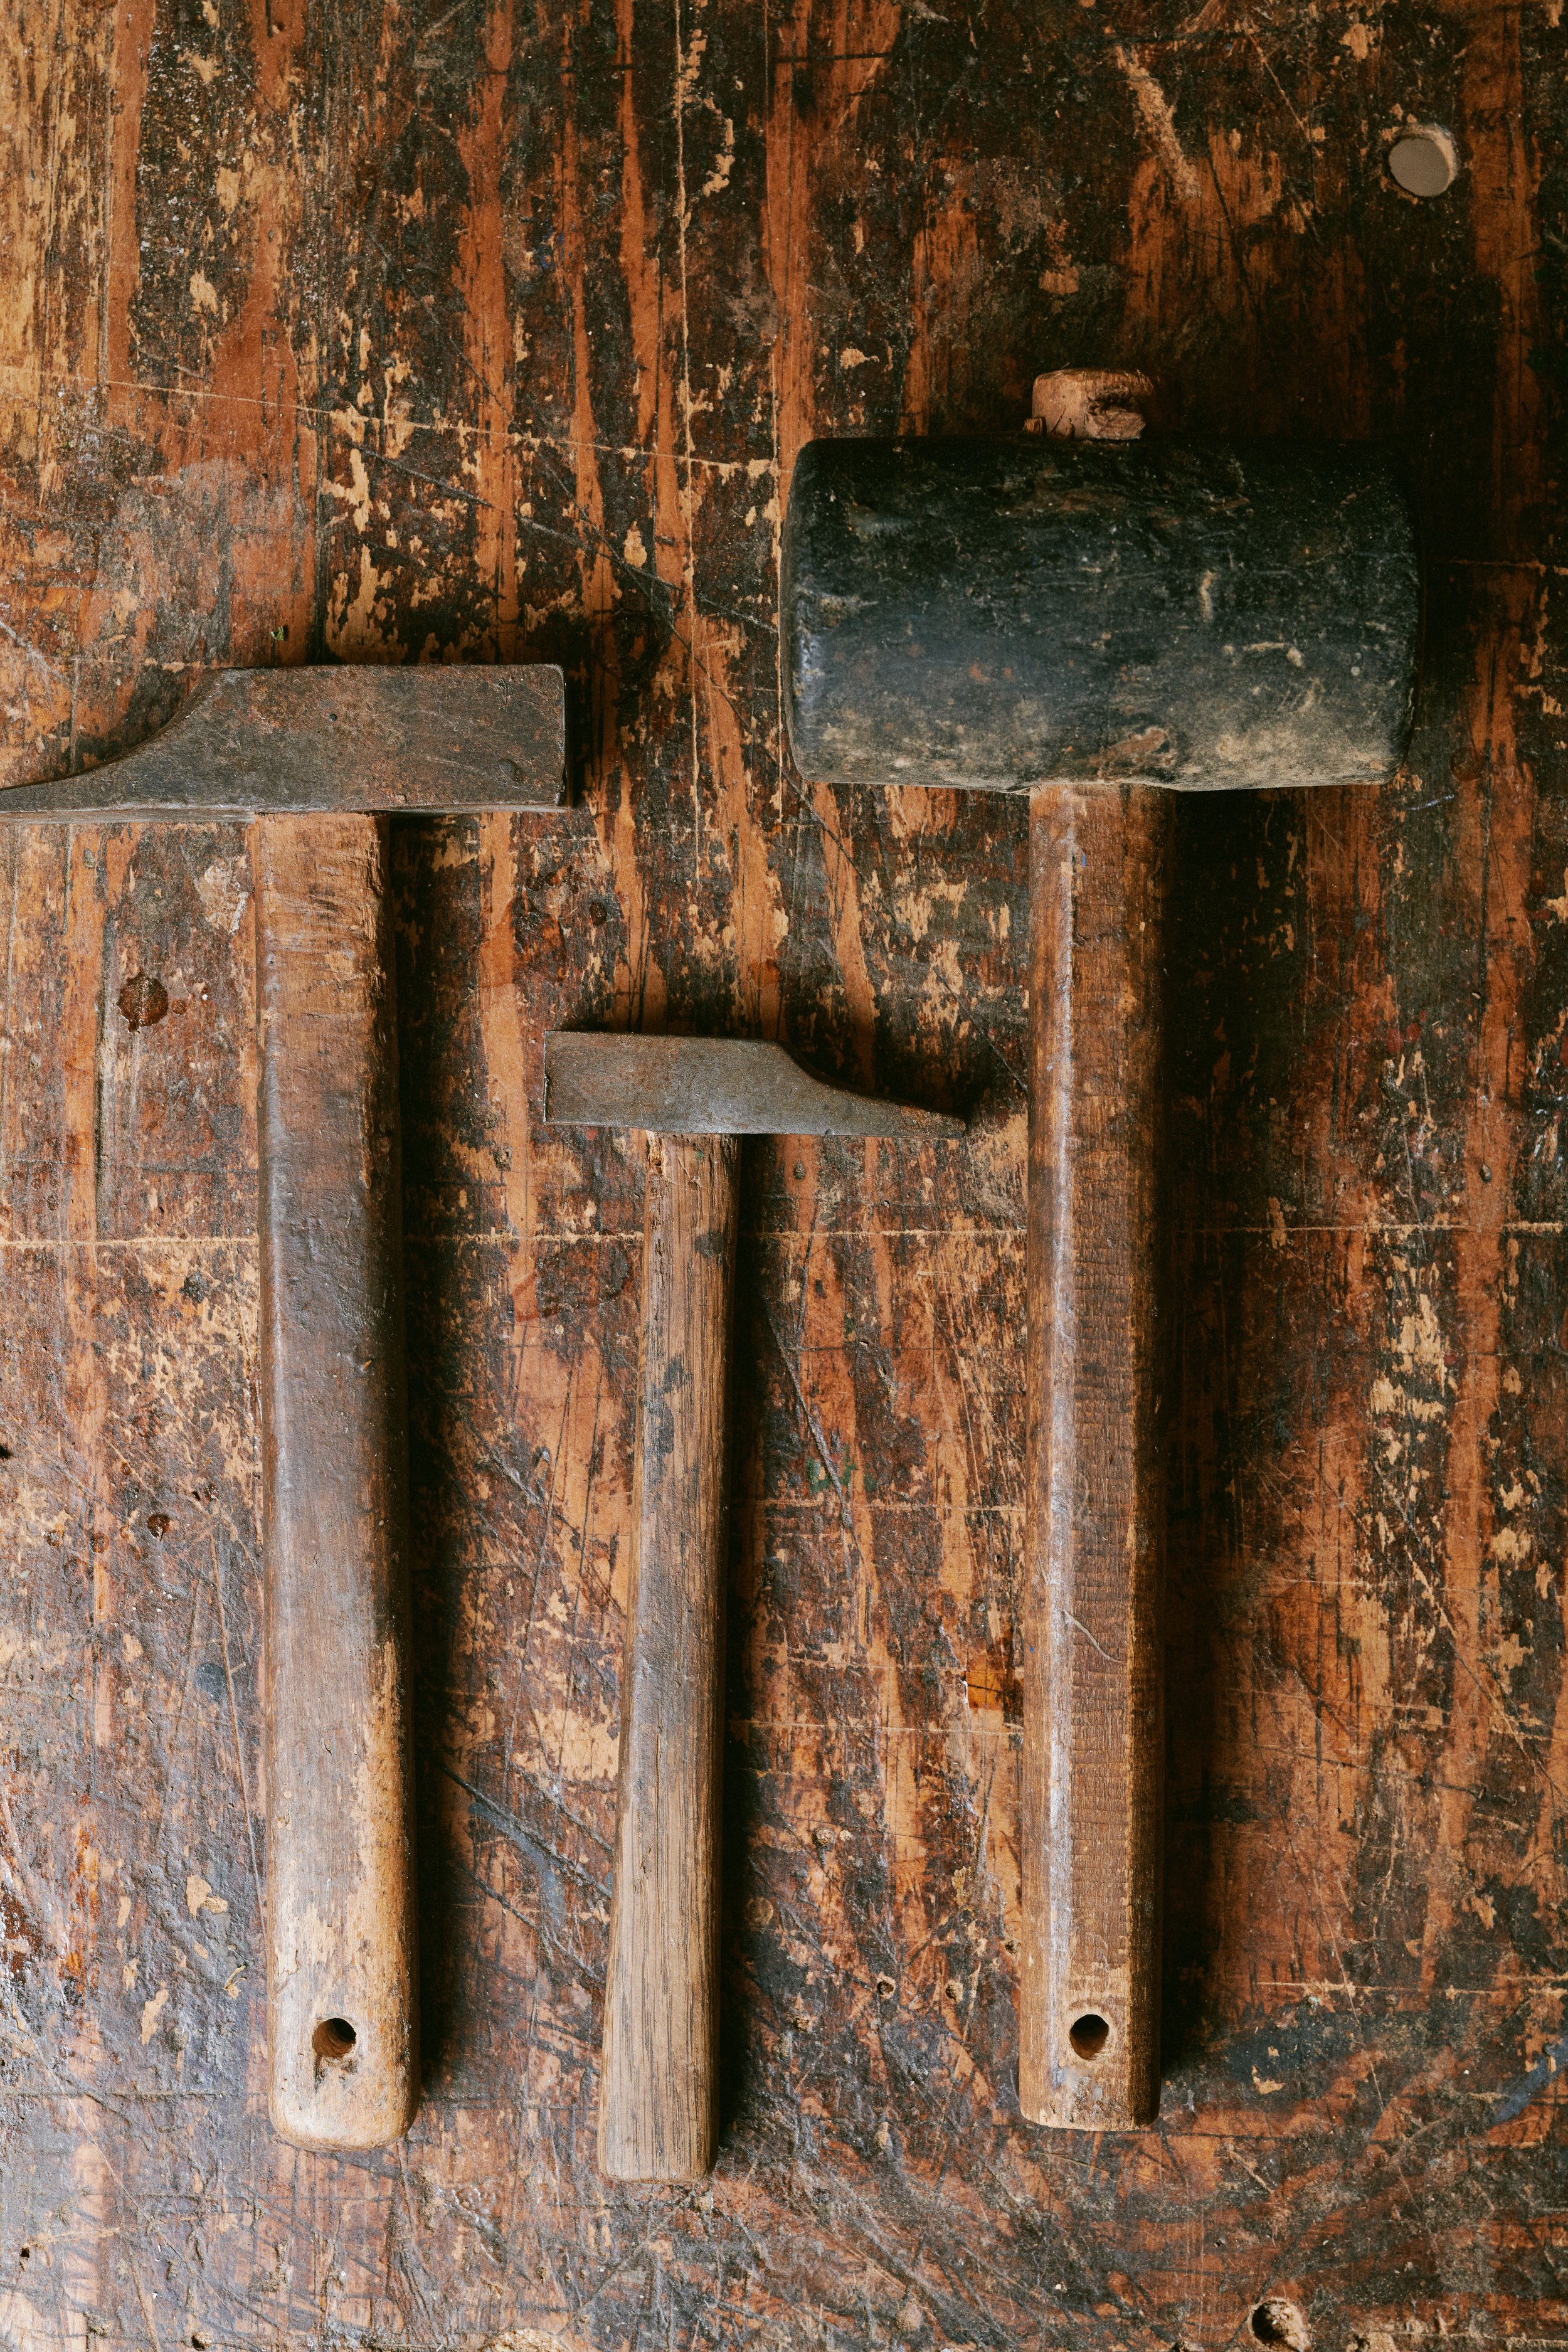   Tools used to break apart the foundations of furniture to begin the restoration process  